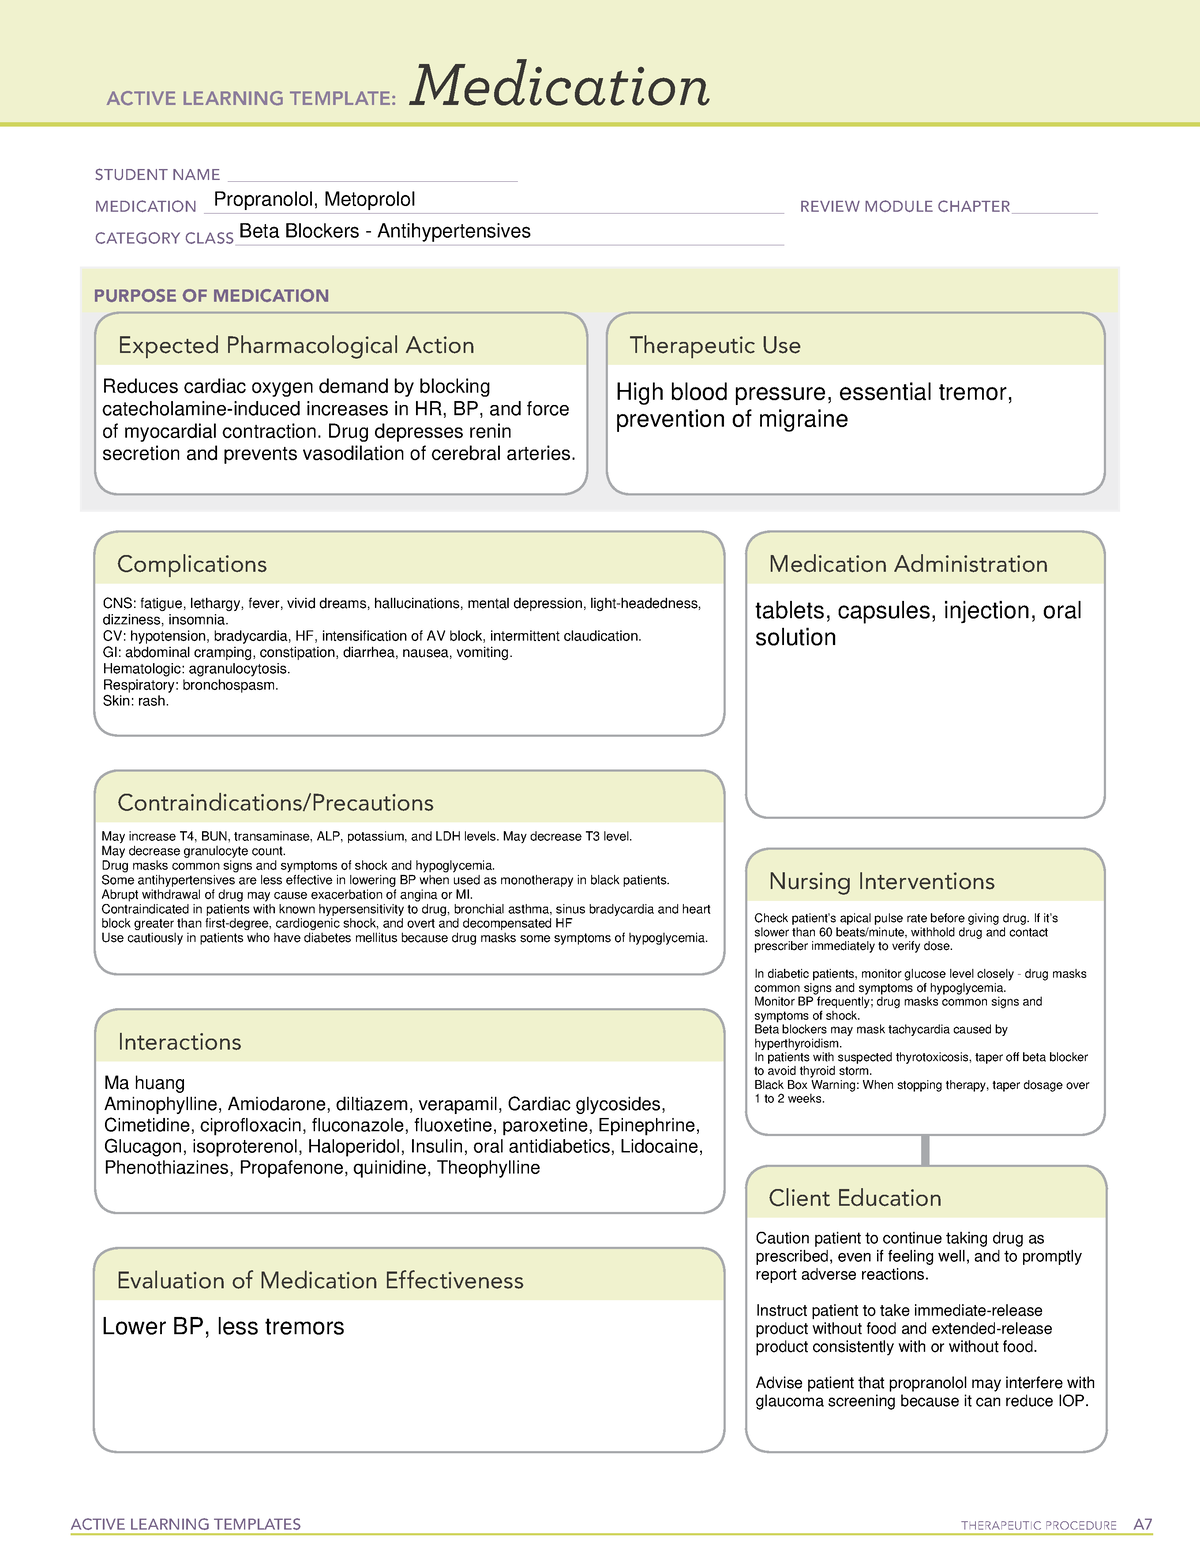 ATI med template Beta Blockers ACTIVE LEARNING TEMPLATES